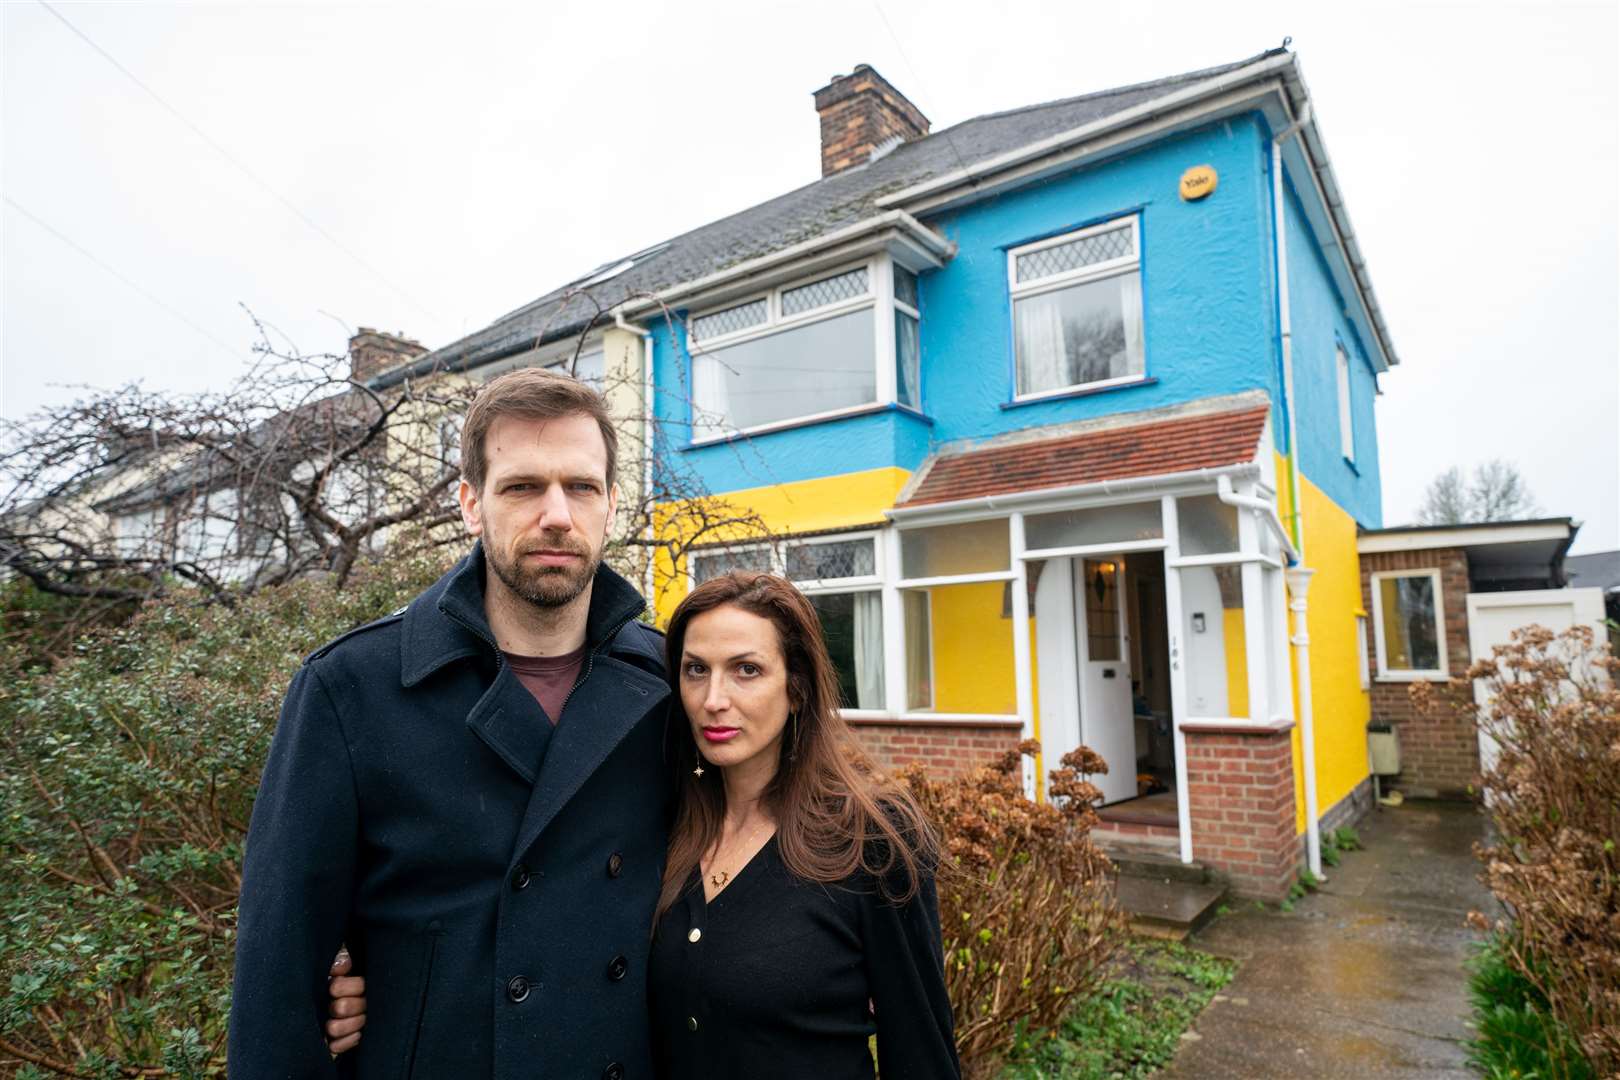 Rend Platings and her husband Michael outside their home in Cambridge, which they have painted in the colours of the Ukraine flag in a show of support for friends in the country. (Joe Giddens/ PA)